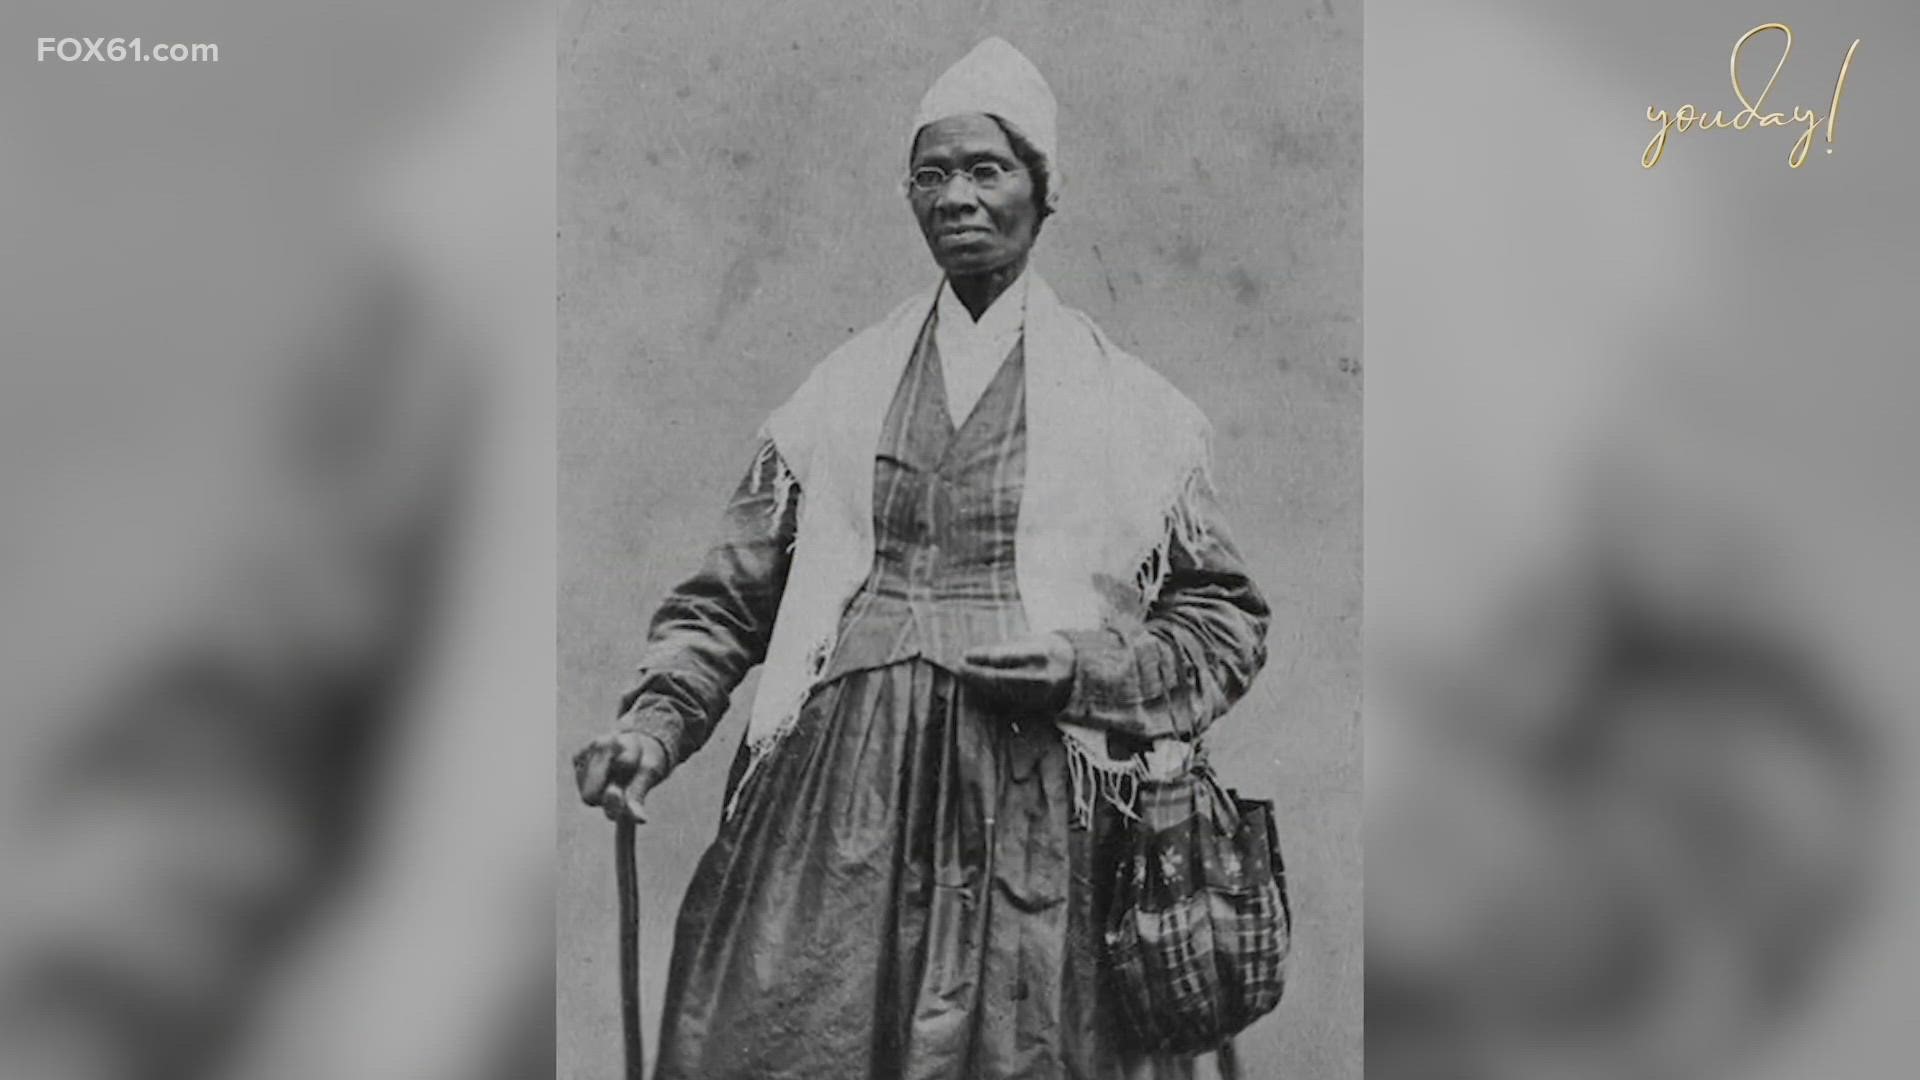 Coach LaMonte tells the story of women's rights activist Sojourner Truth and how we are only as powerful as the truth that we convince ourselves.